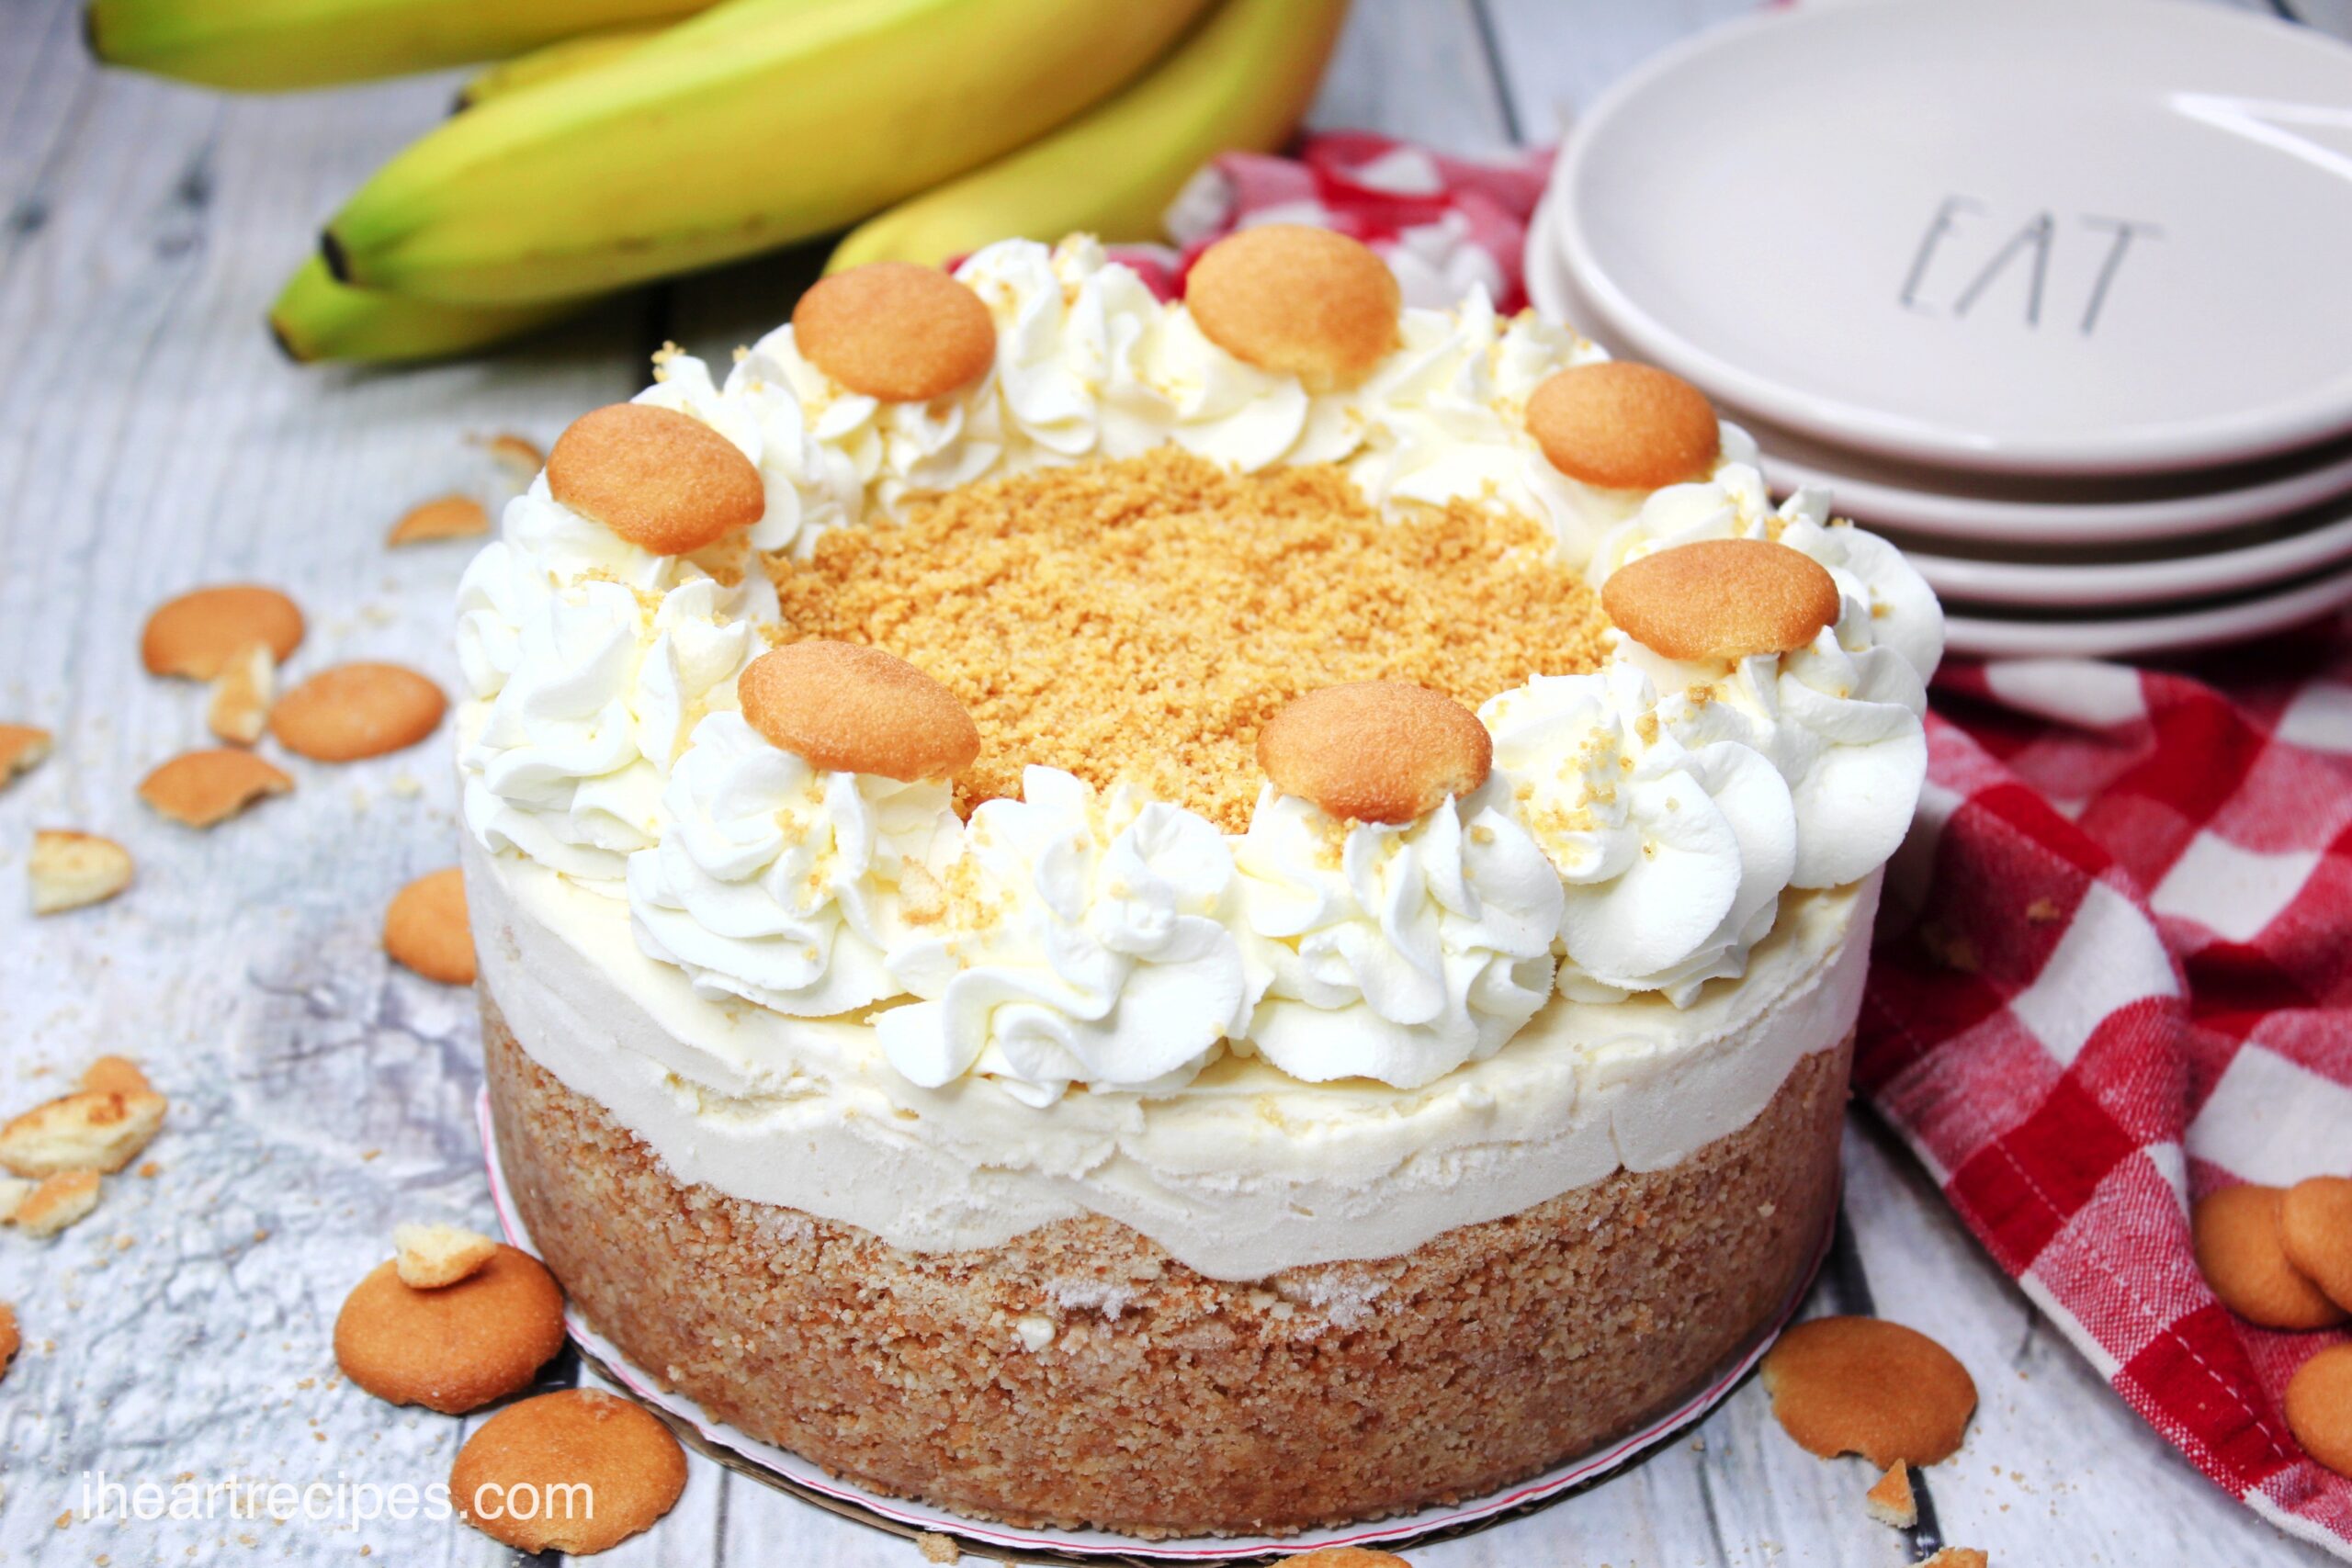 A whole banana pudding cheesecake, topped with whipped cream and vanilla wafers. The cheesecake has layers of wafer crust, banana pudding, and whipped cream.